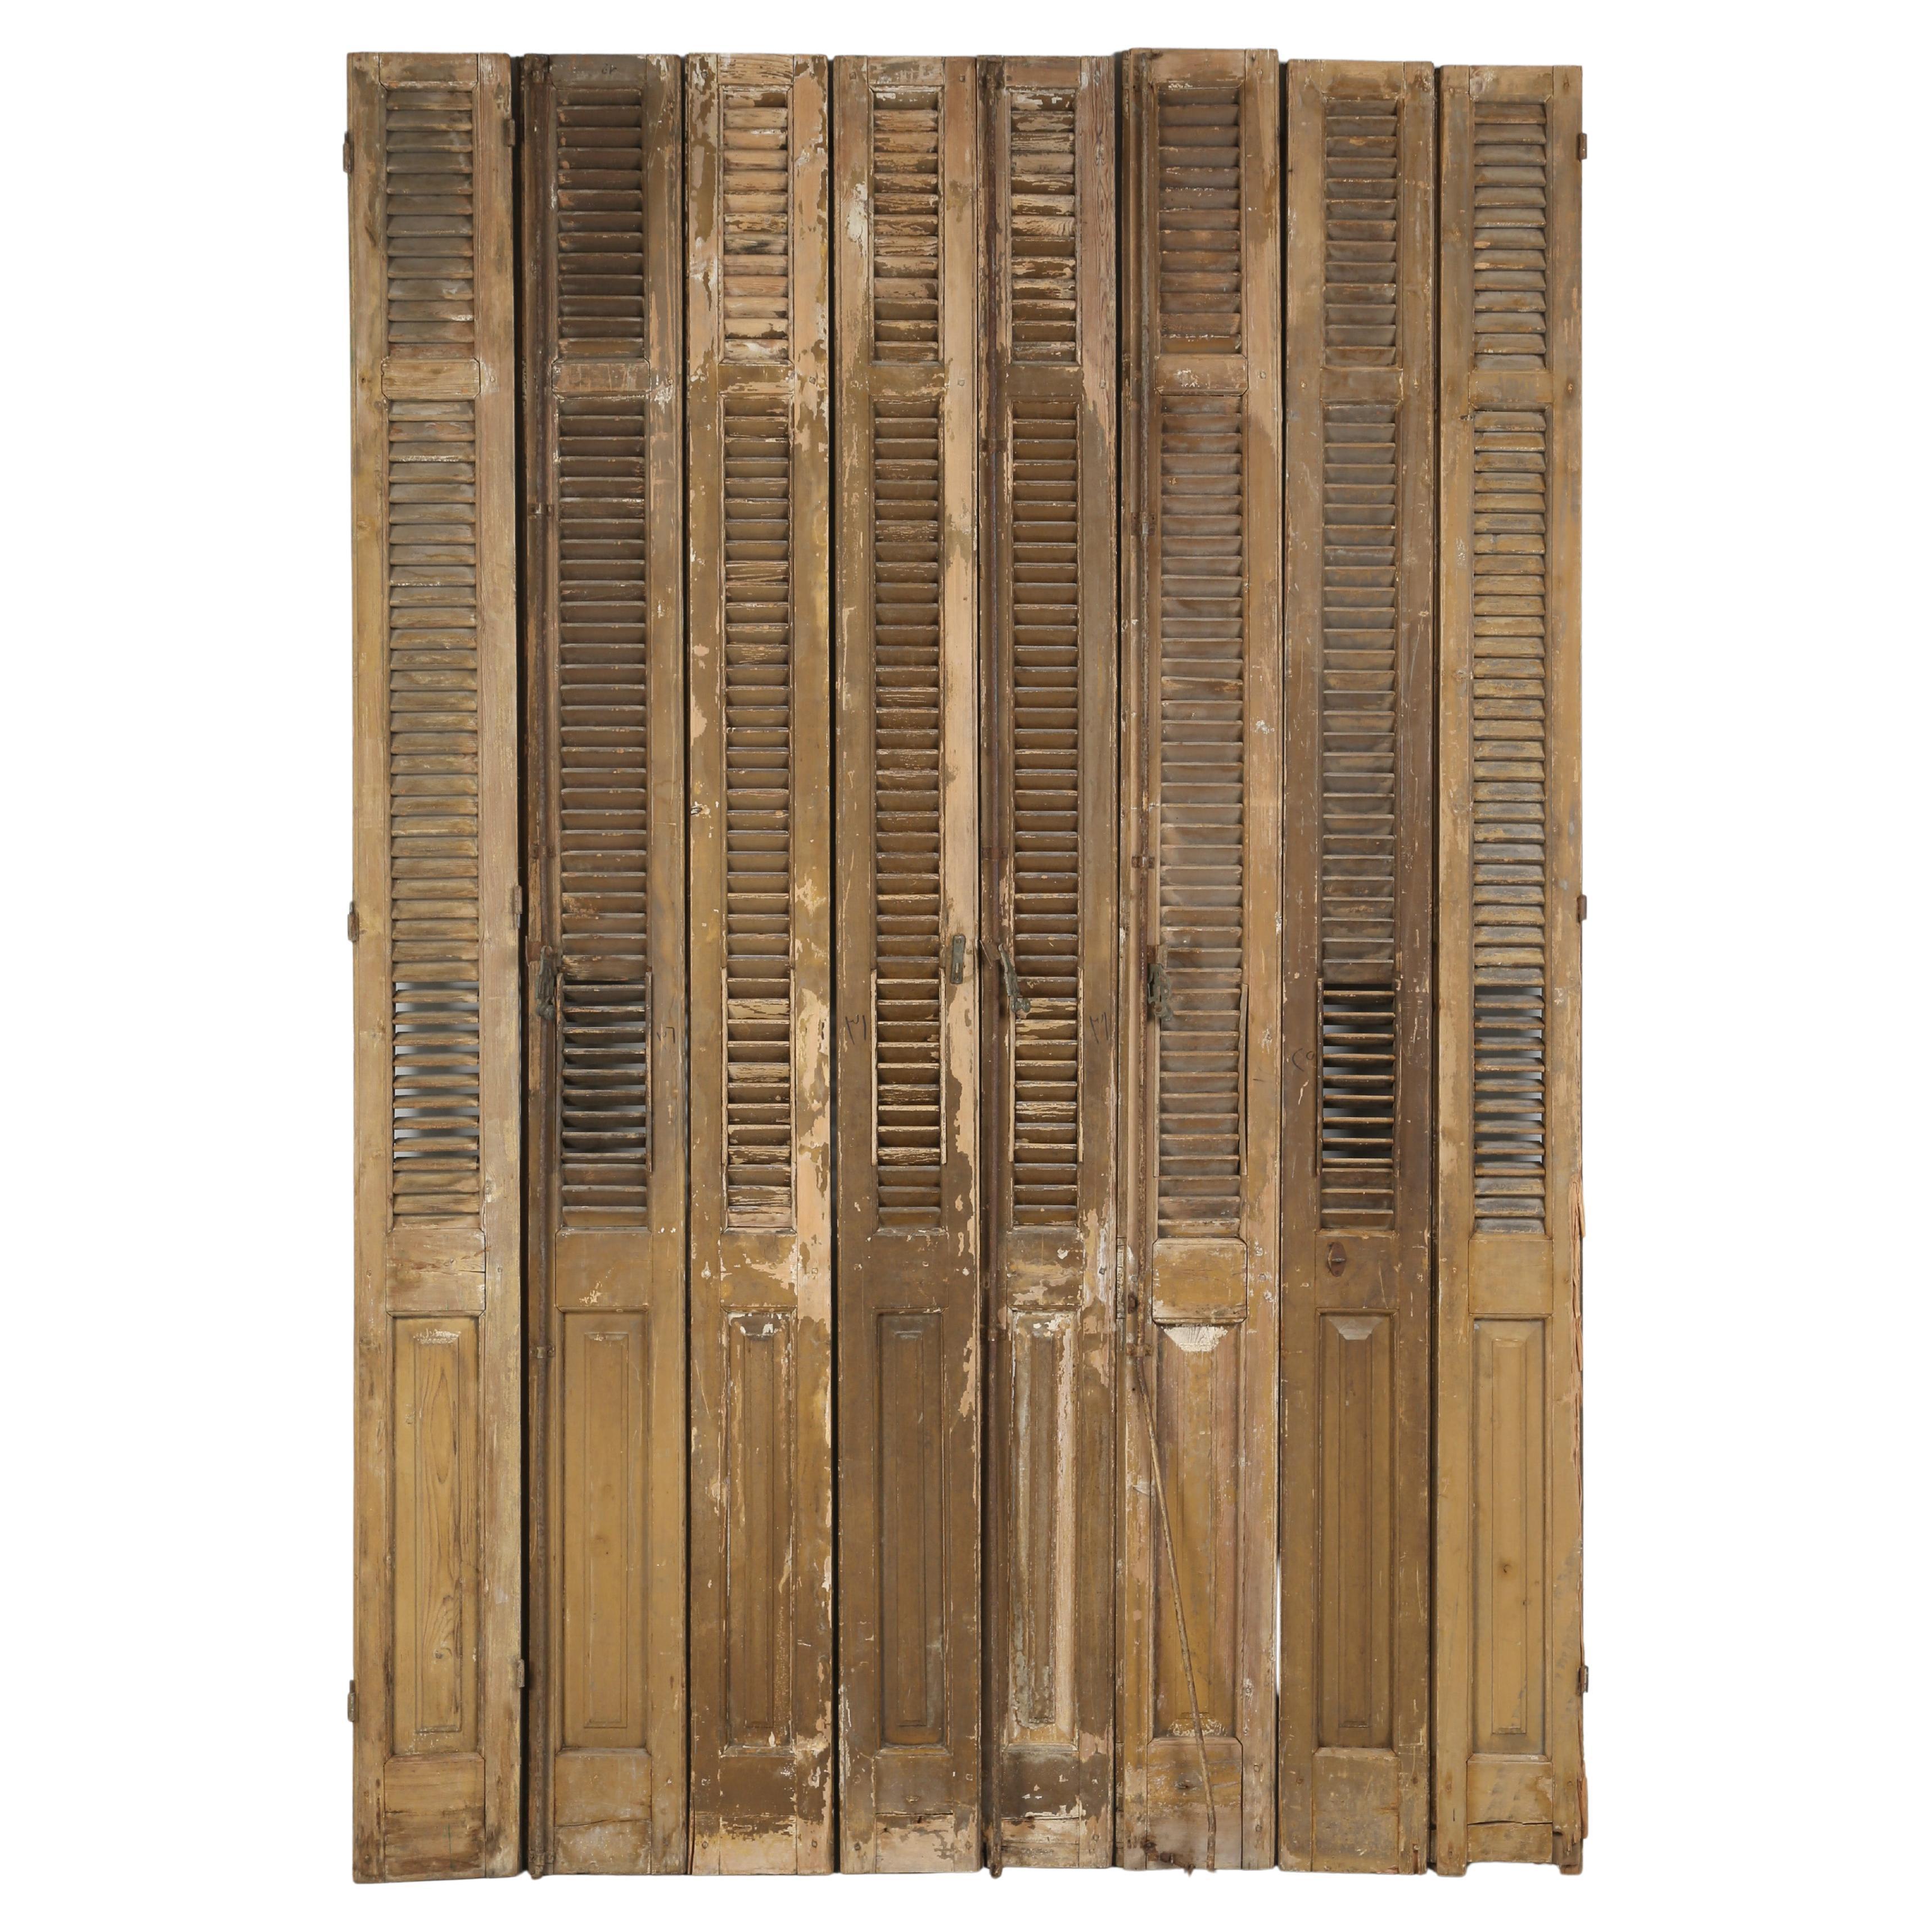 Set of (8) Antique French Shutters Removed from a Chateau in Brittany c1800's